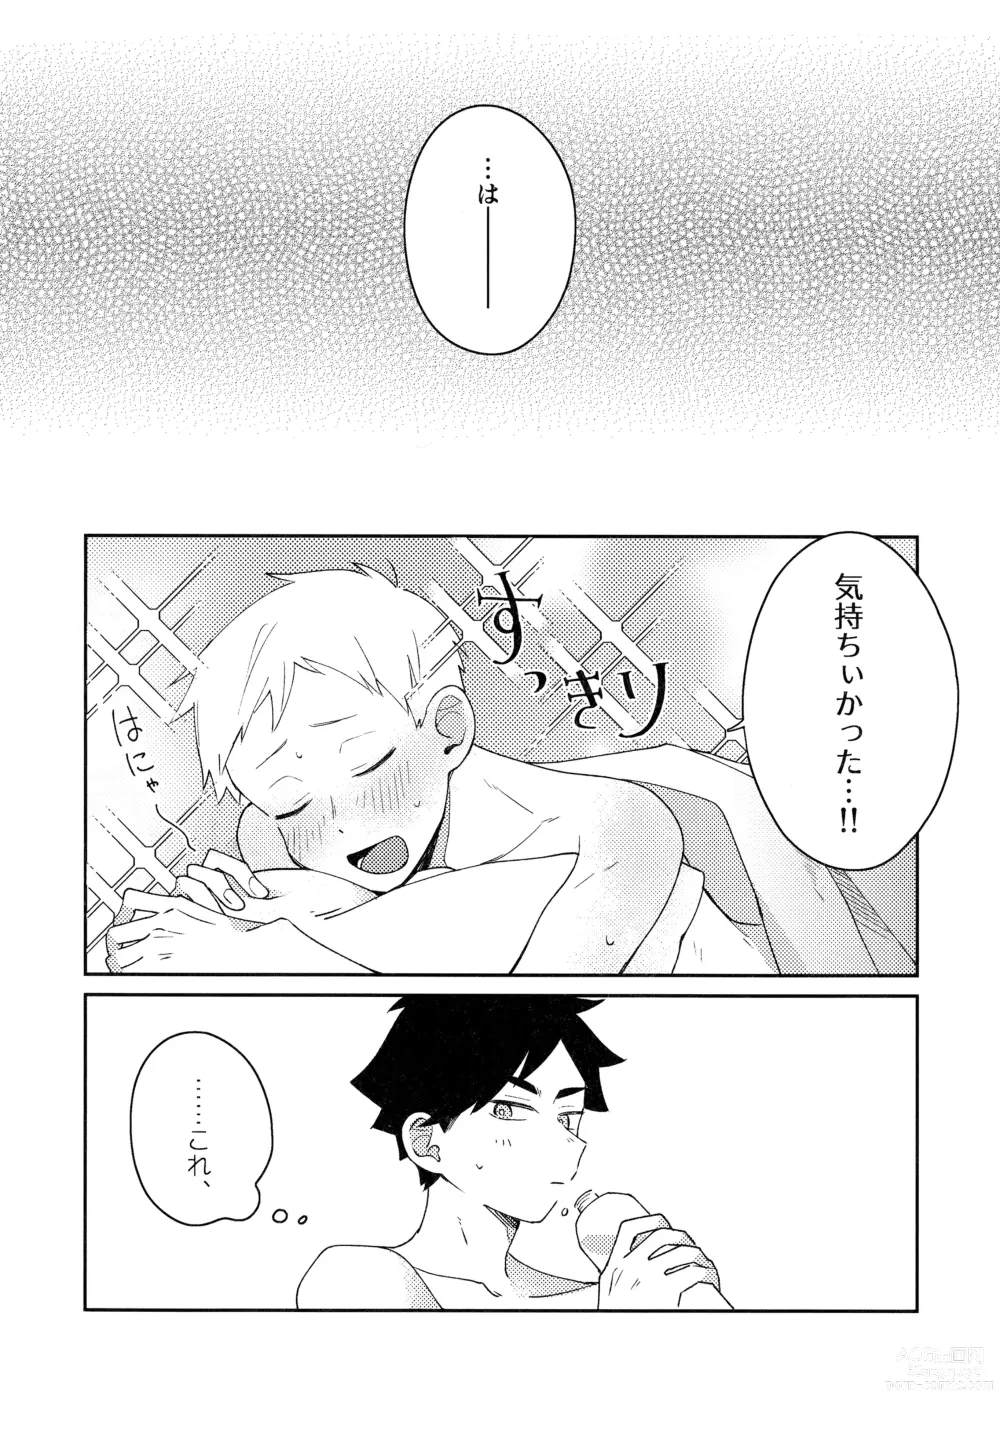 Page 133 of doujinshi Light Side Day